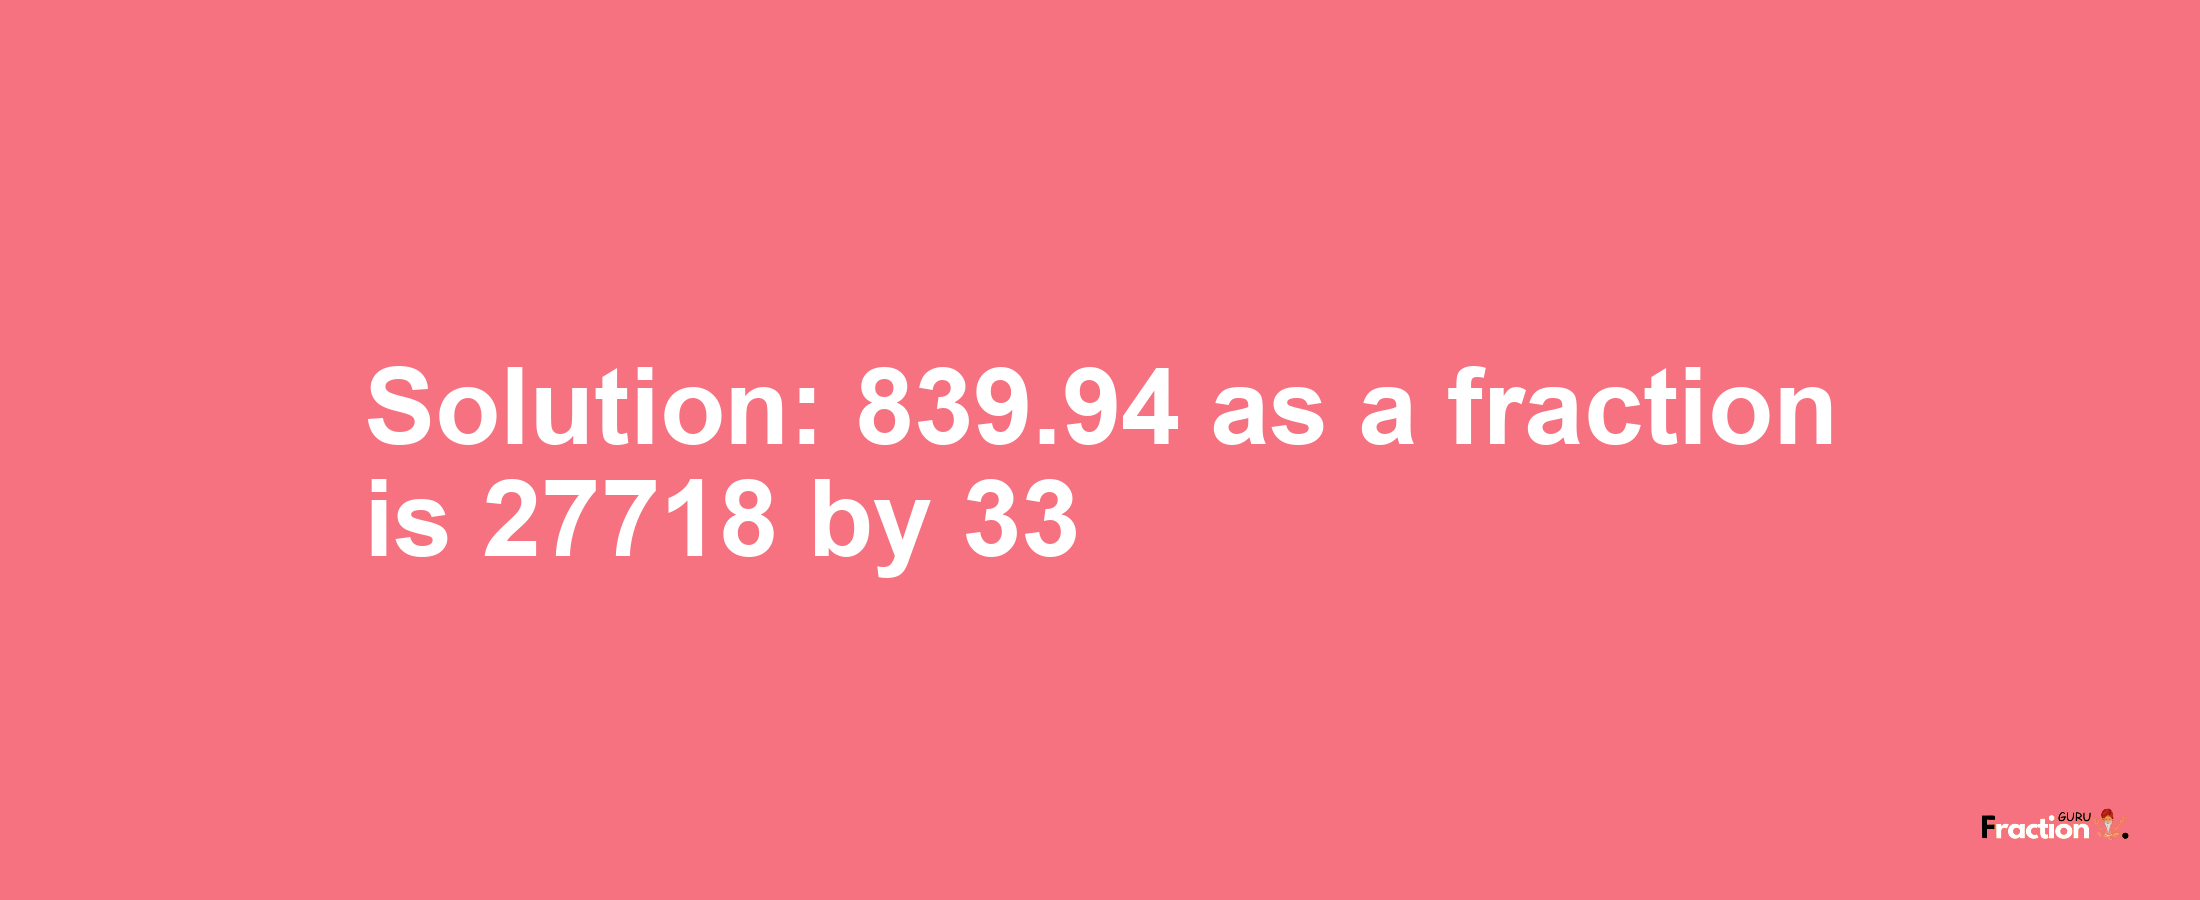 Solution:839.94 as a fraction is 27718/33